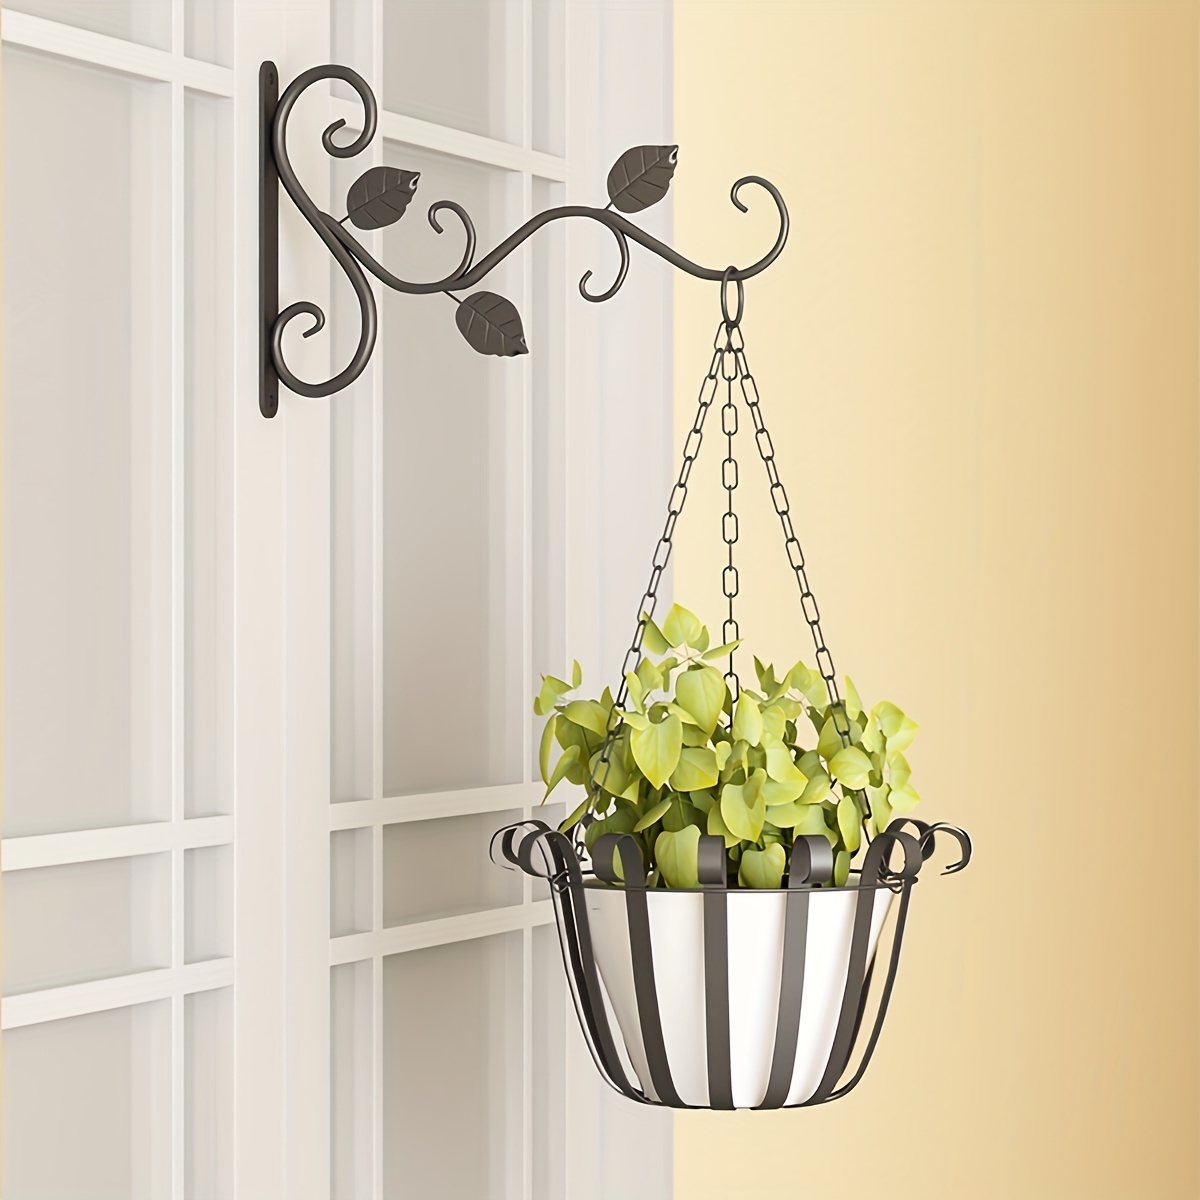 Hooks and Hangers for Planter and Decorative Hangings